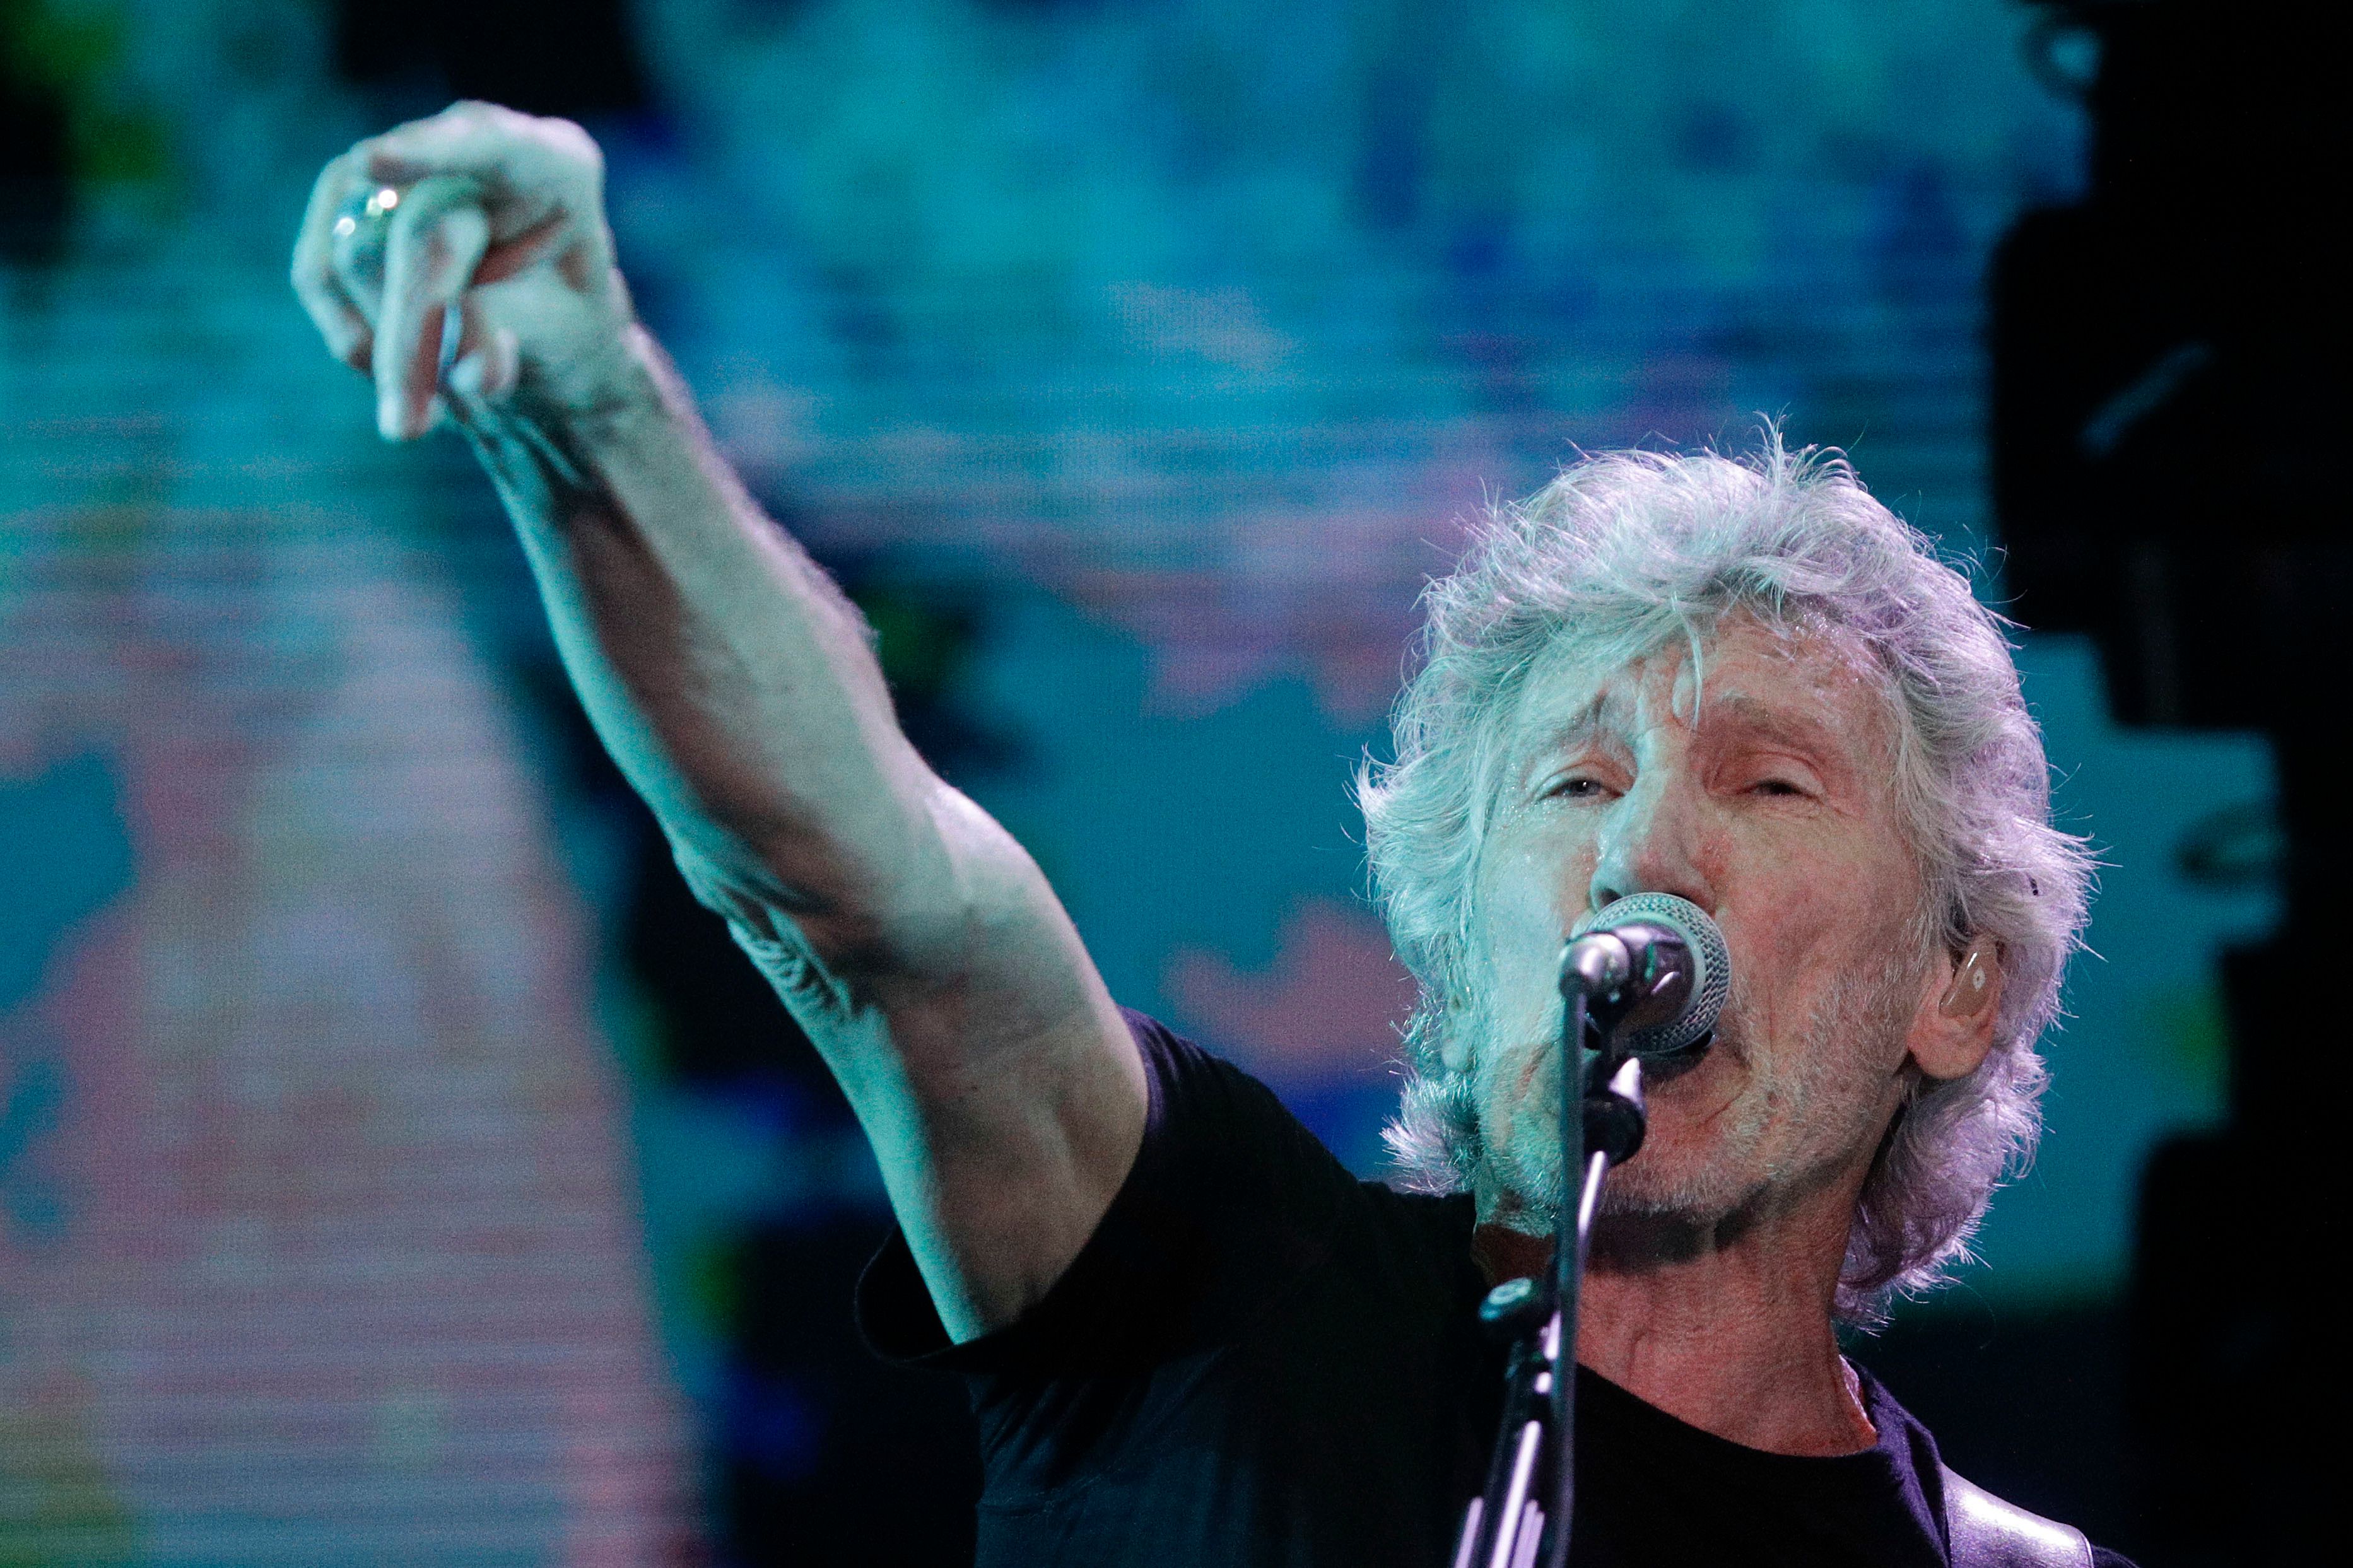 Roger waters band senturinpsychic